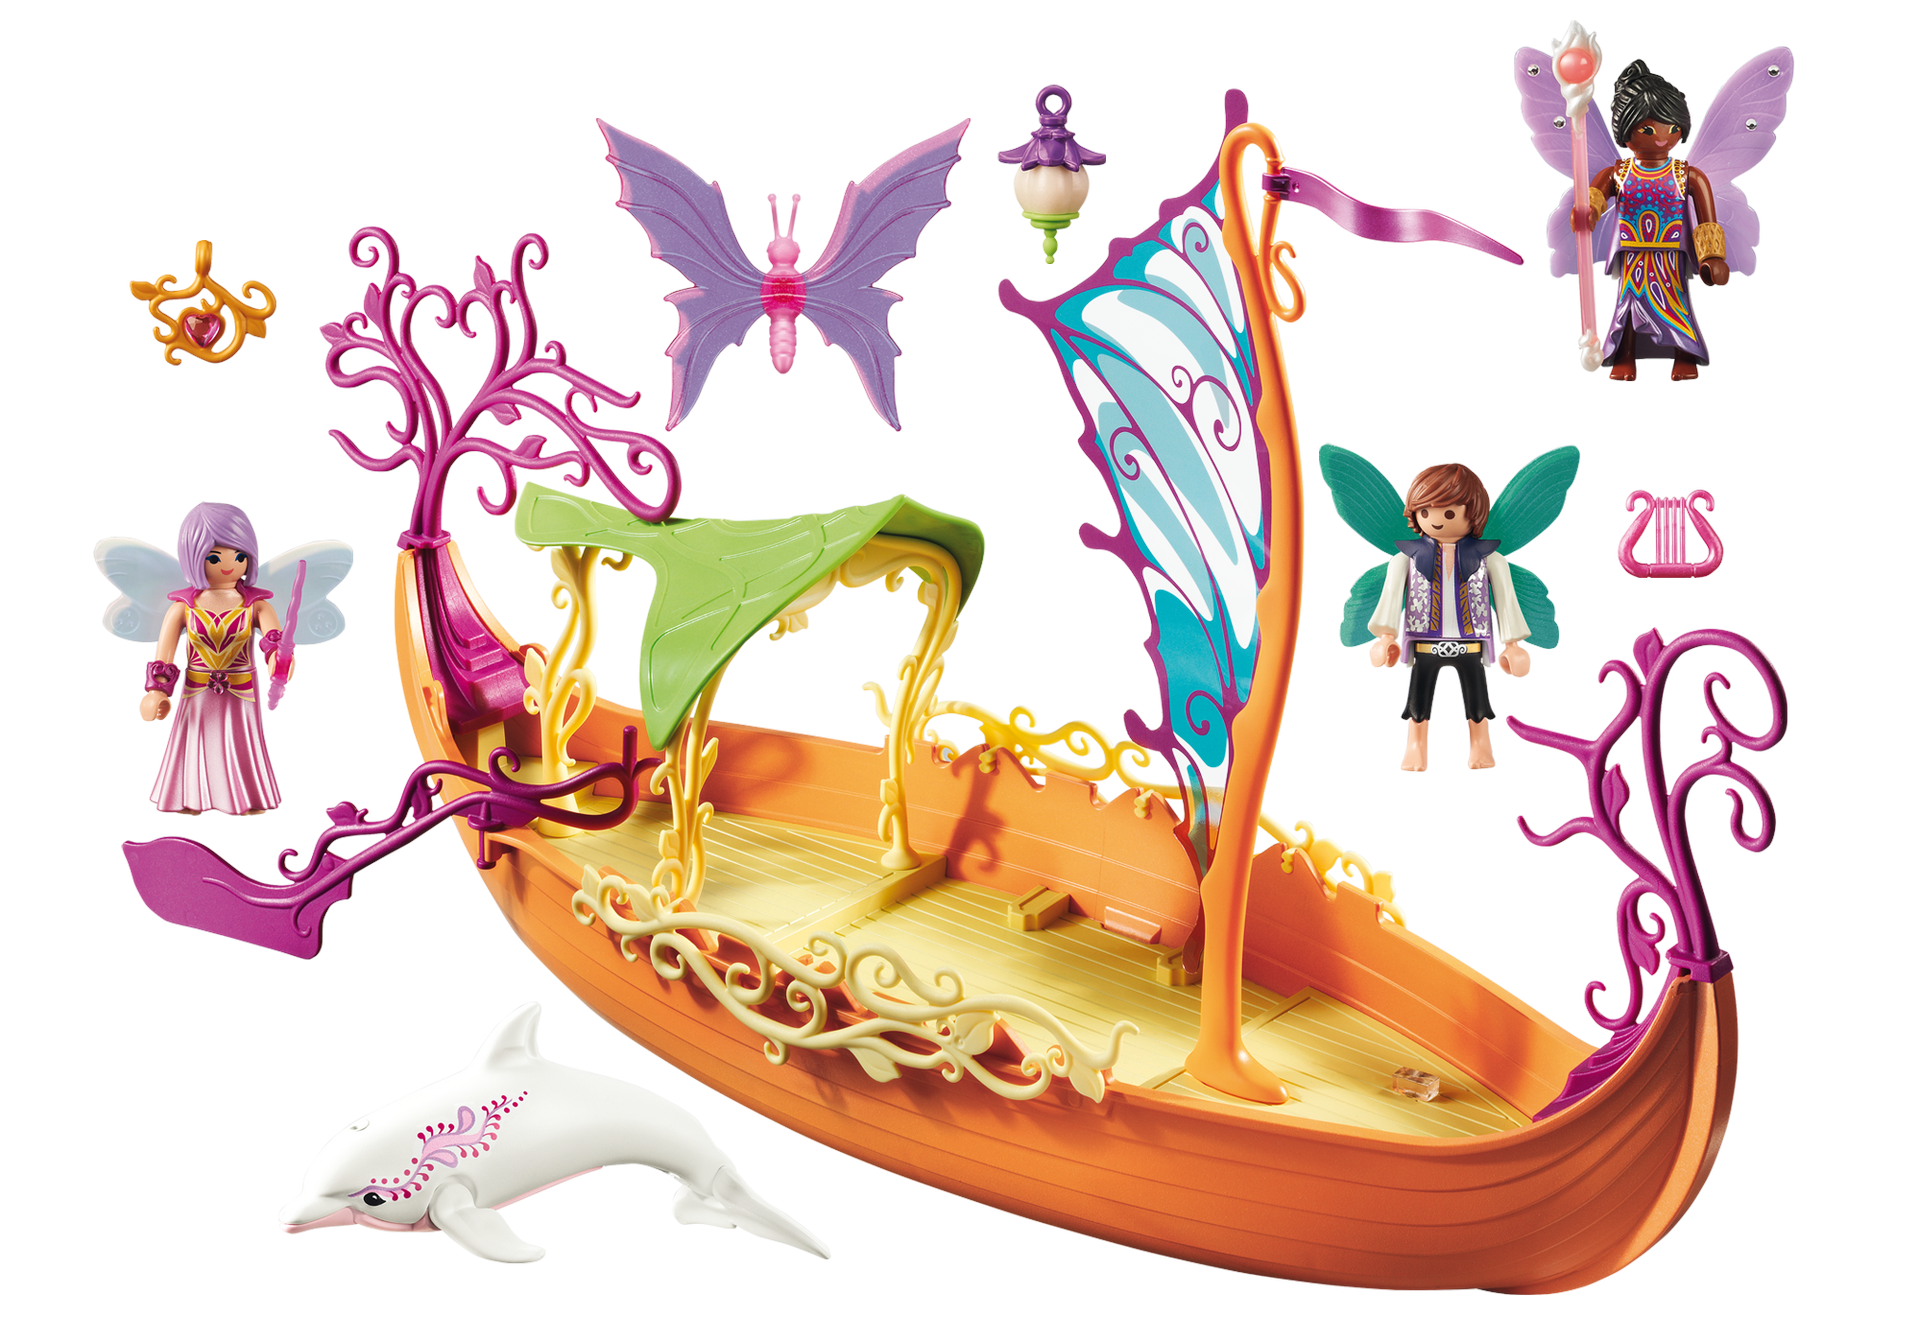 Playmobil Fairy Boat Discounts, 41% OFF | prep.openr.fr